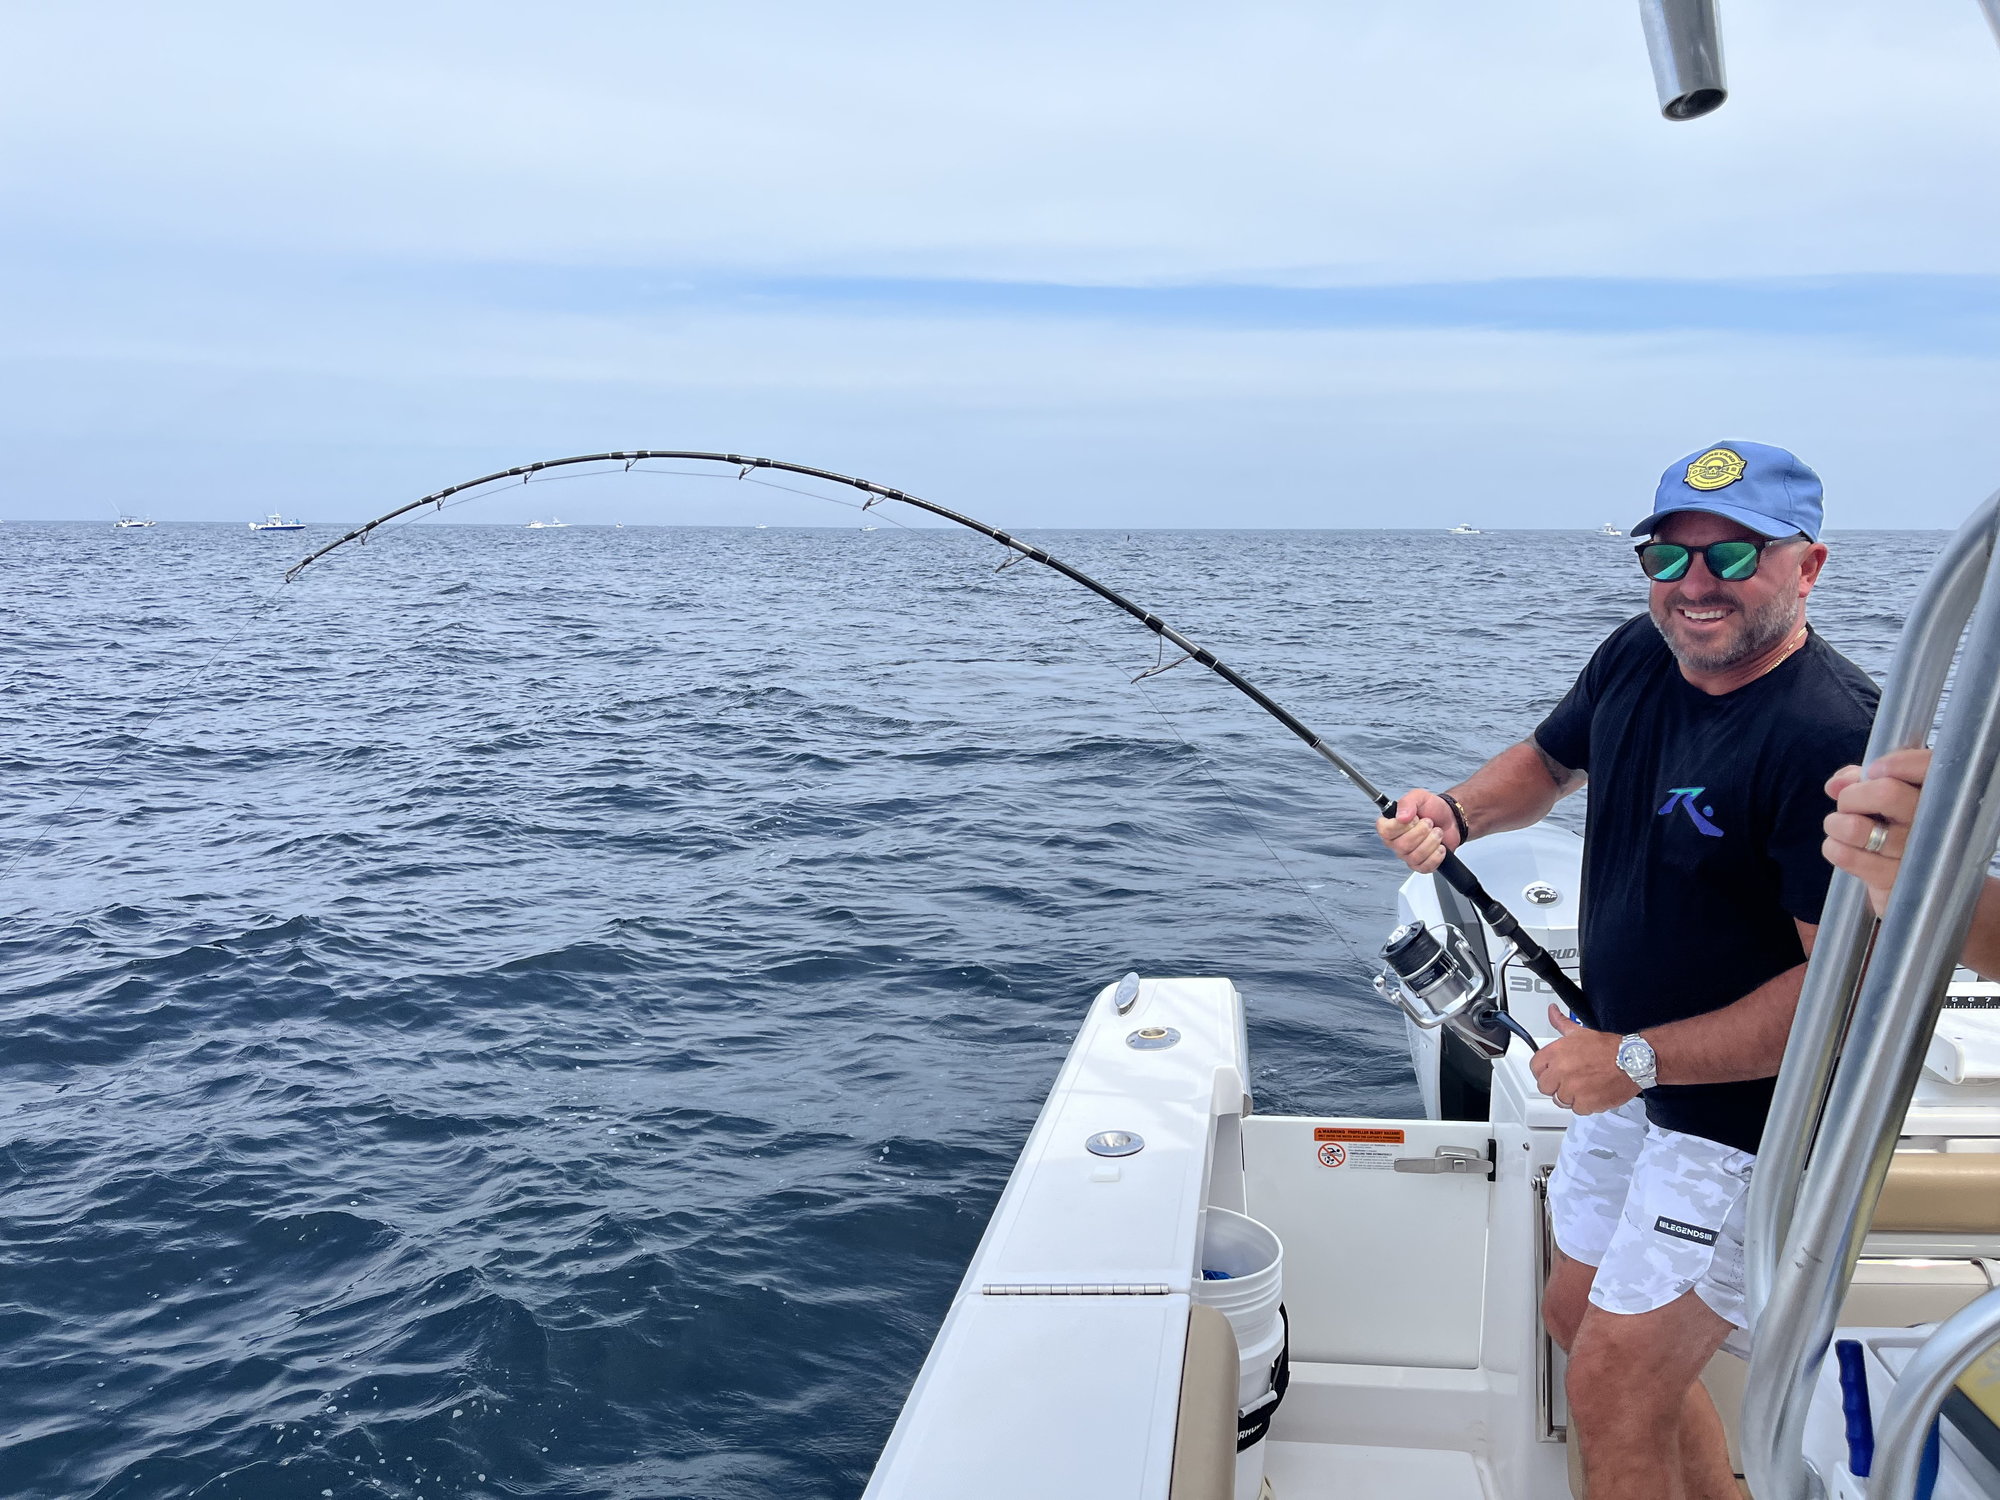 Slow pitch jigging gear - The Hull Truth - Boating and Fishing Forum